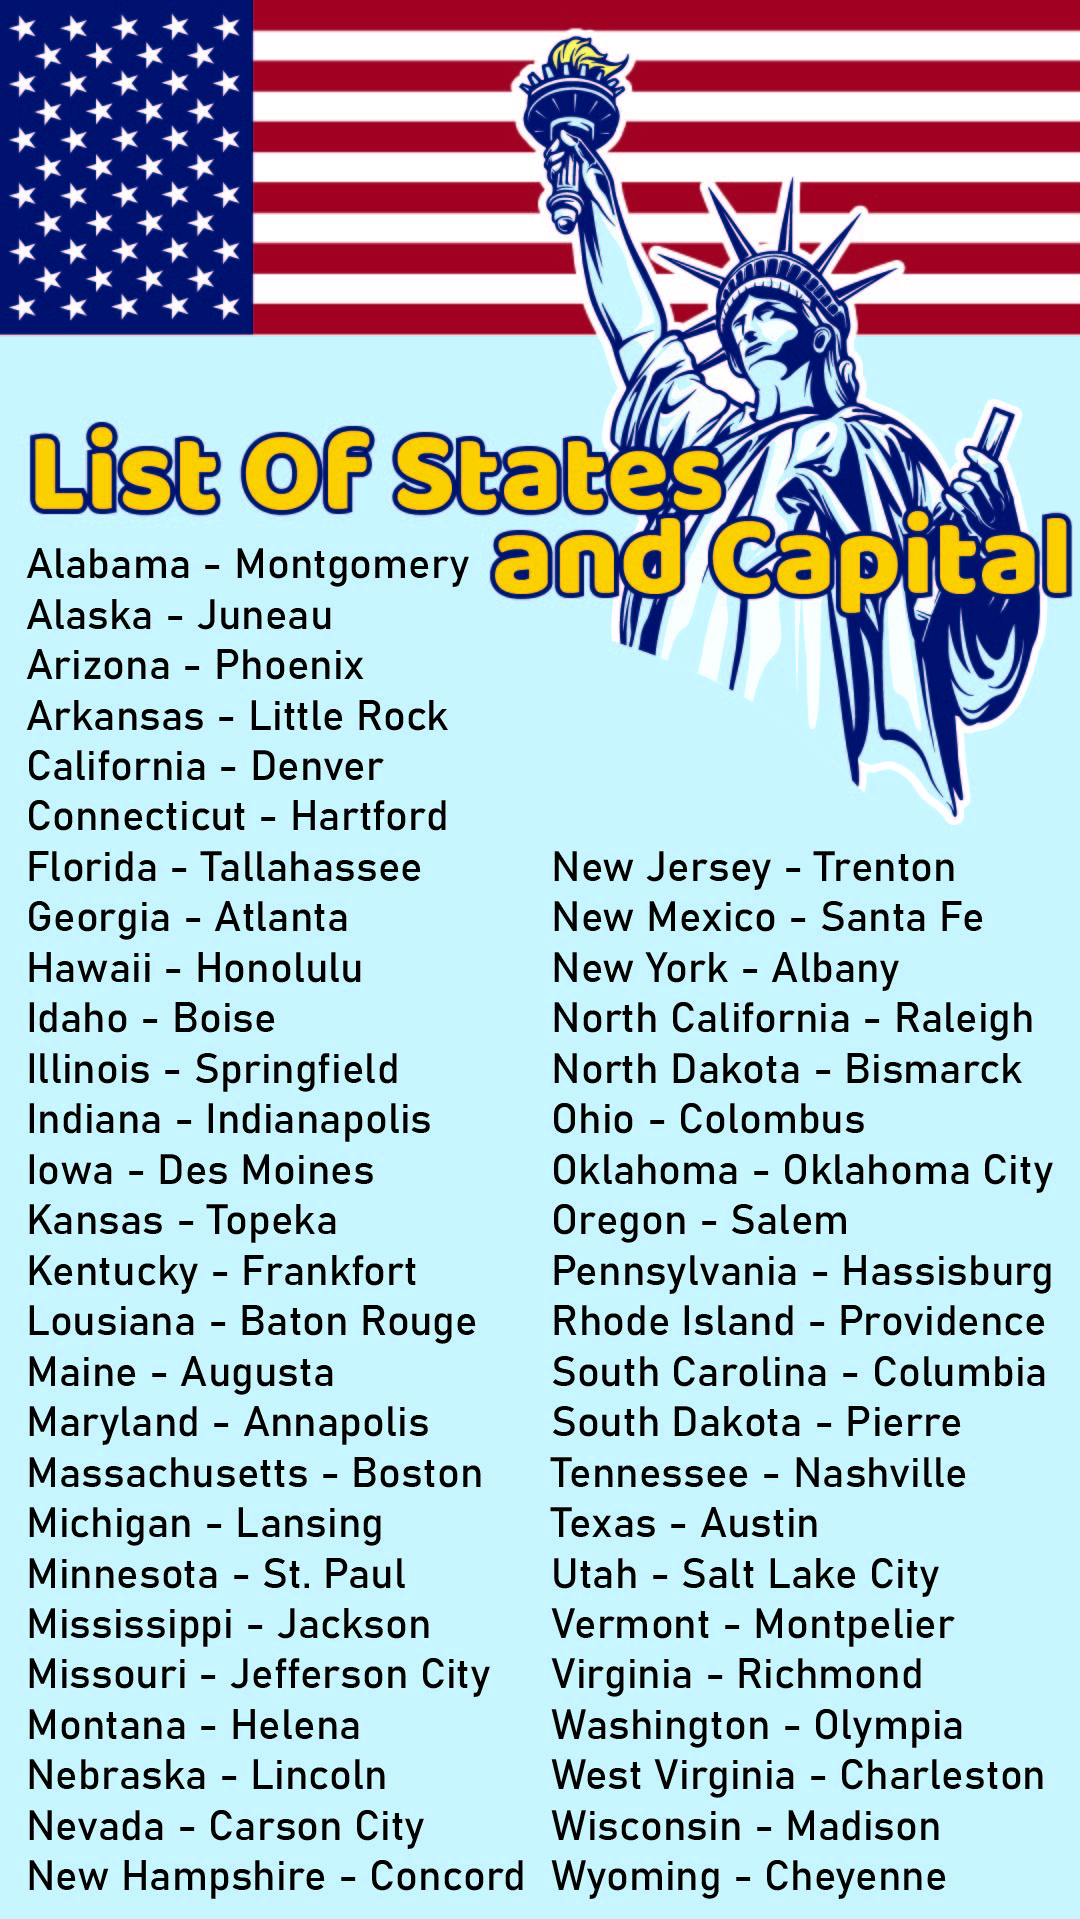 free-printable-list-of-50-states-and-capitals-state-capitals-chart